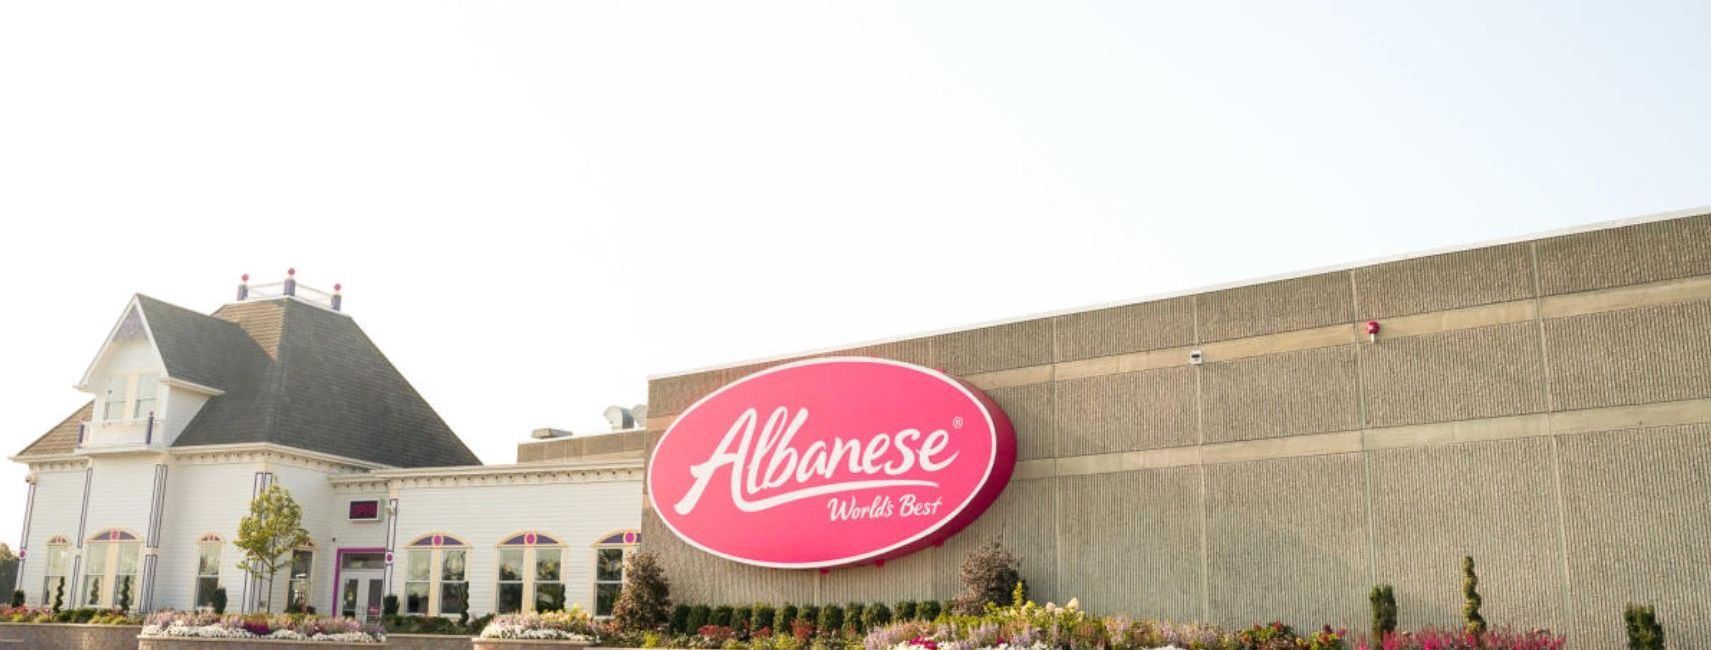 Albanese Candy